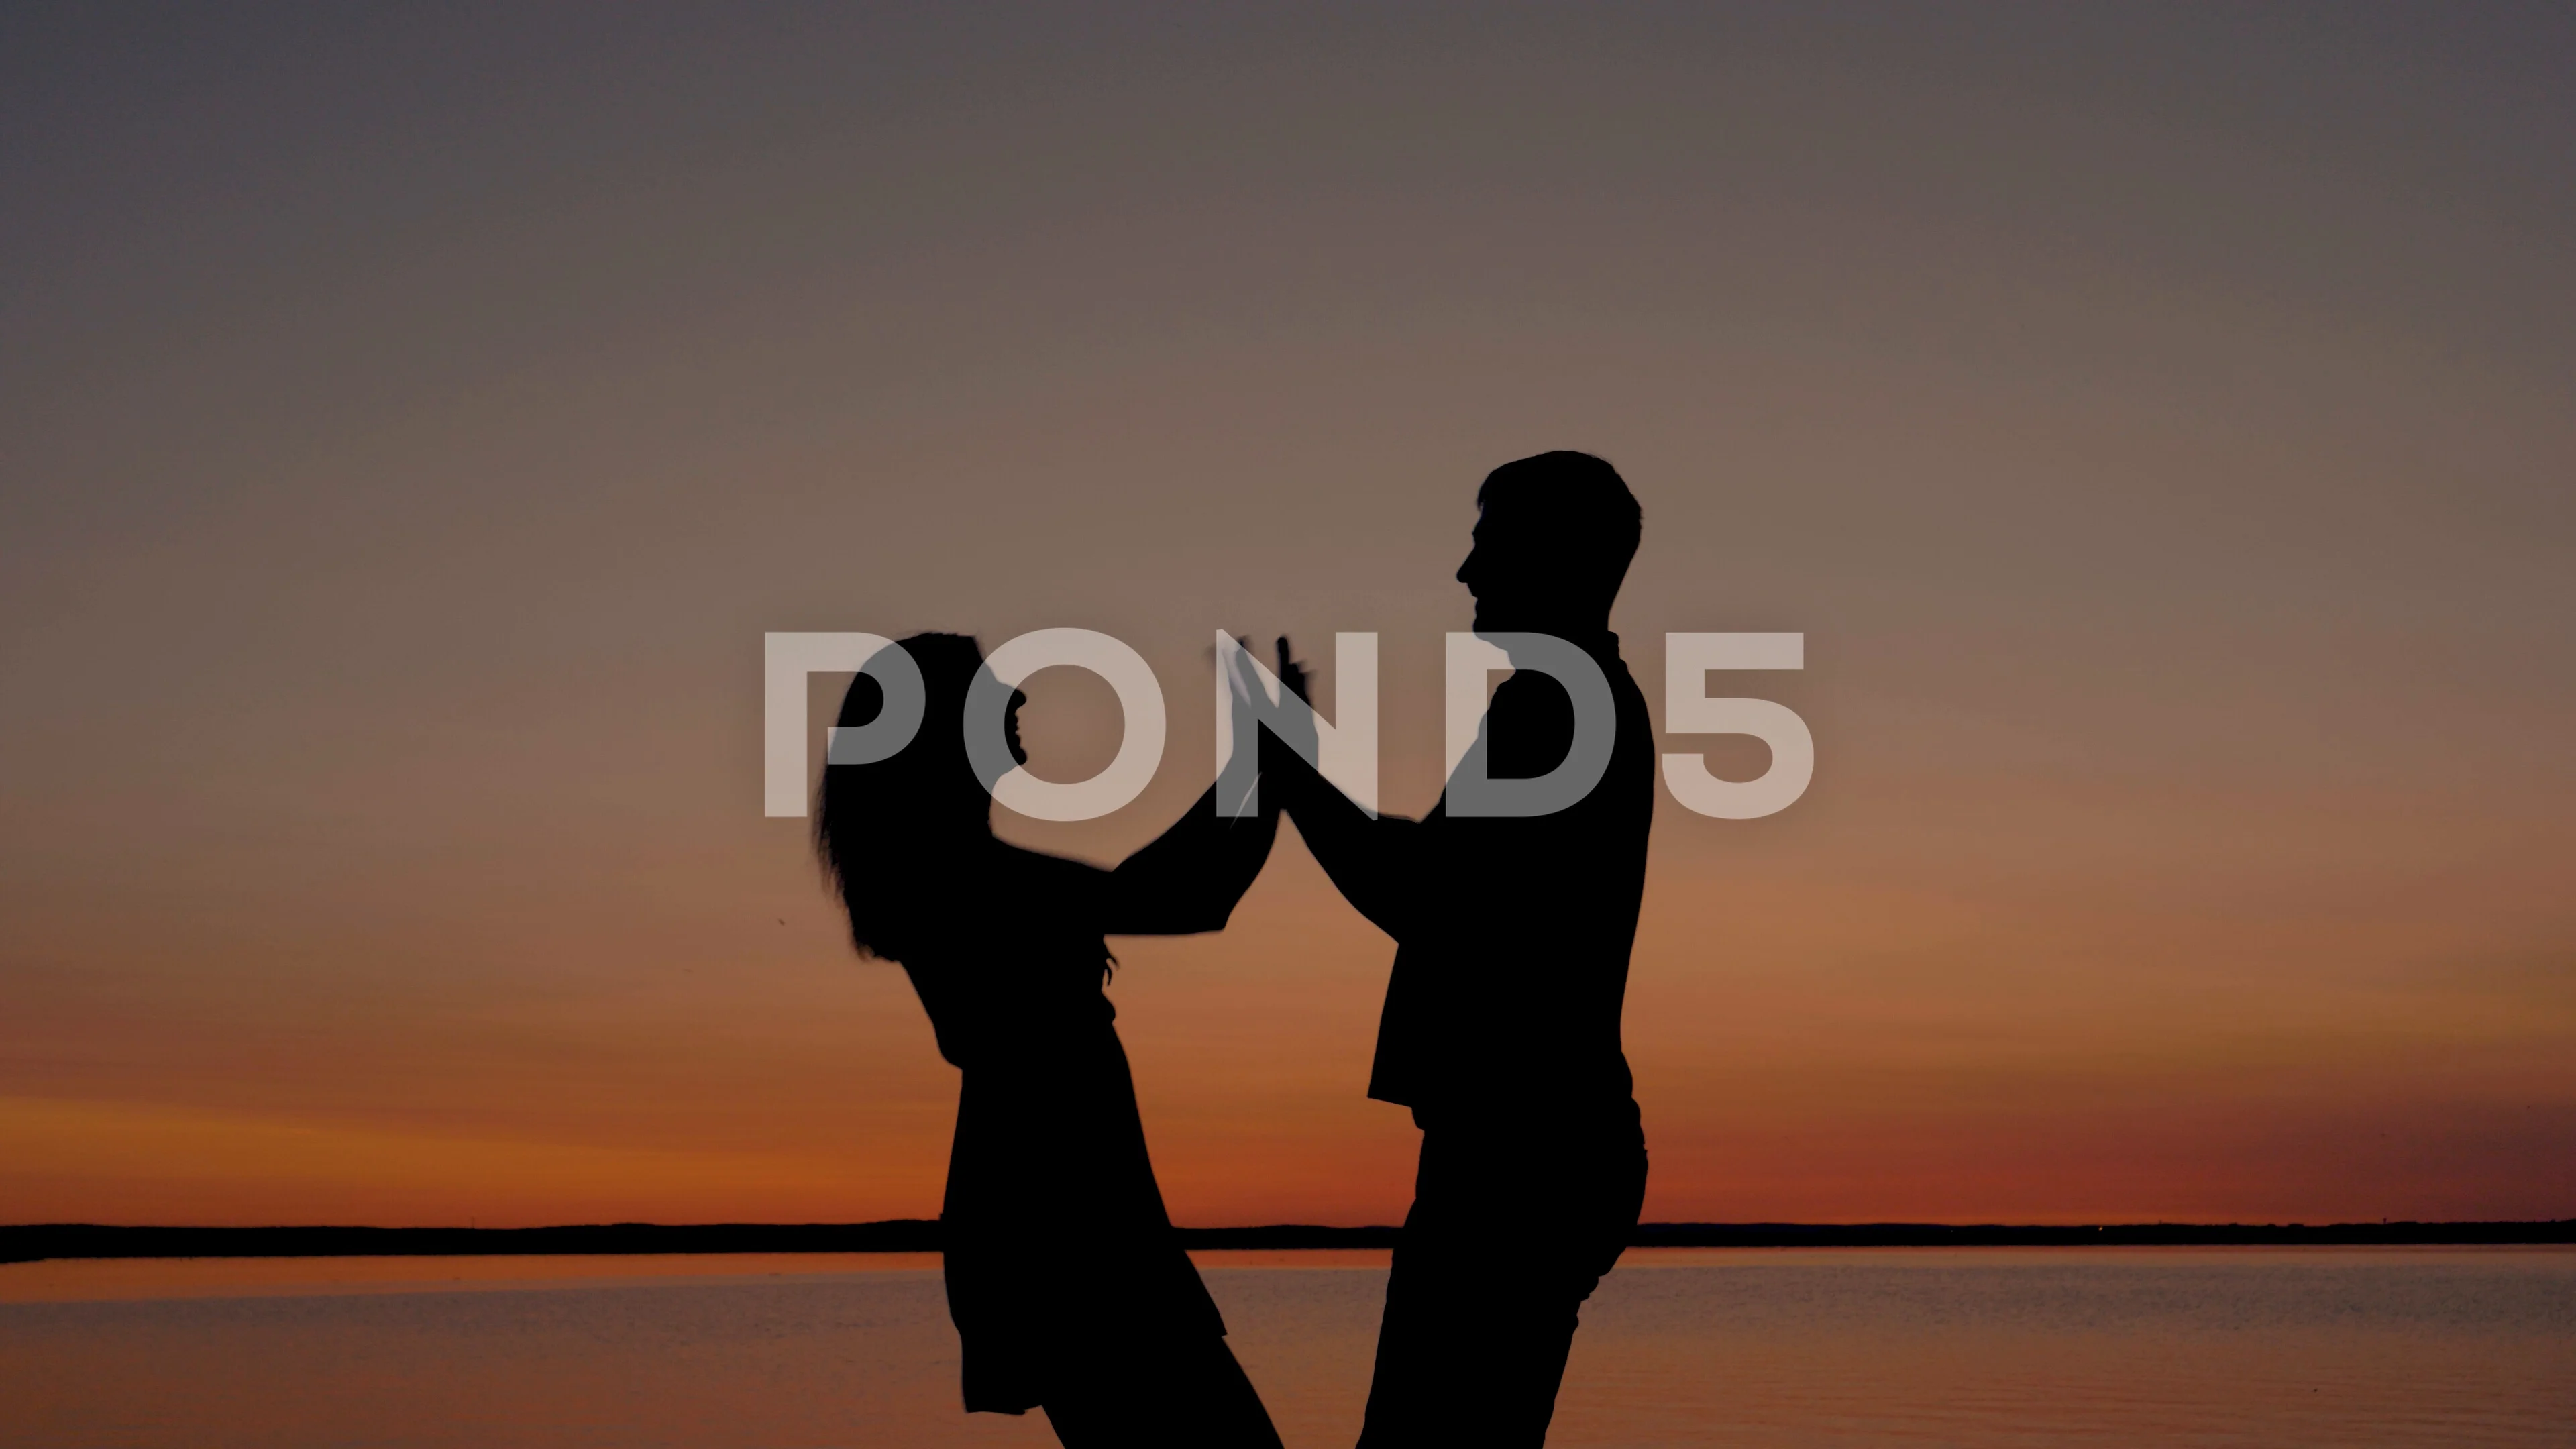 panic pond Disclose Happy Couple Silhouette Stock Footage ~ Royalty Free Stock Videos | Pond5